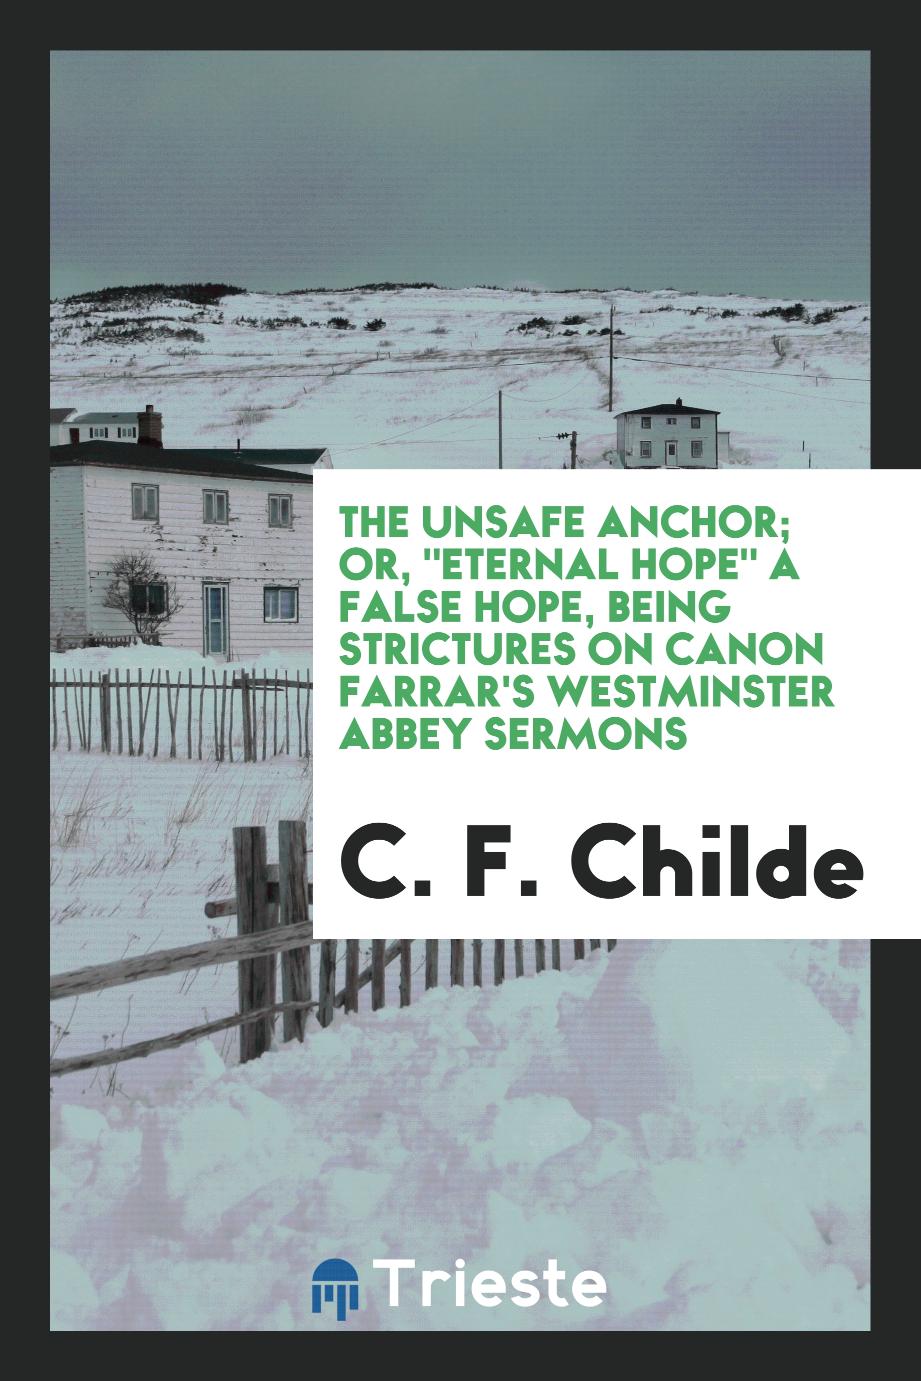 The Unsafe Anchor; Or, "Eternal Hope" a False Hope, Being Strictures on Canon Farrar's Westminster Abbey Sermons